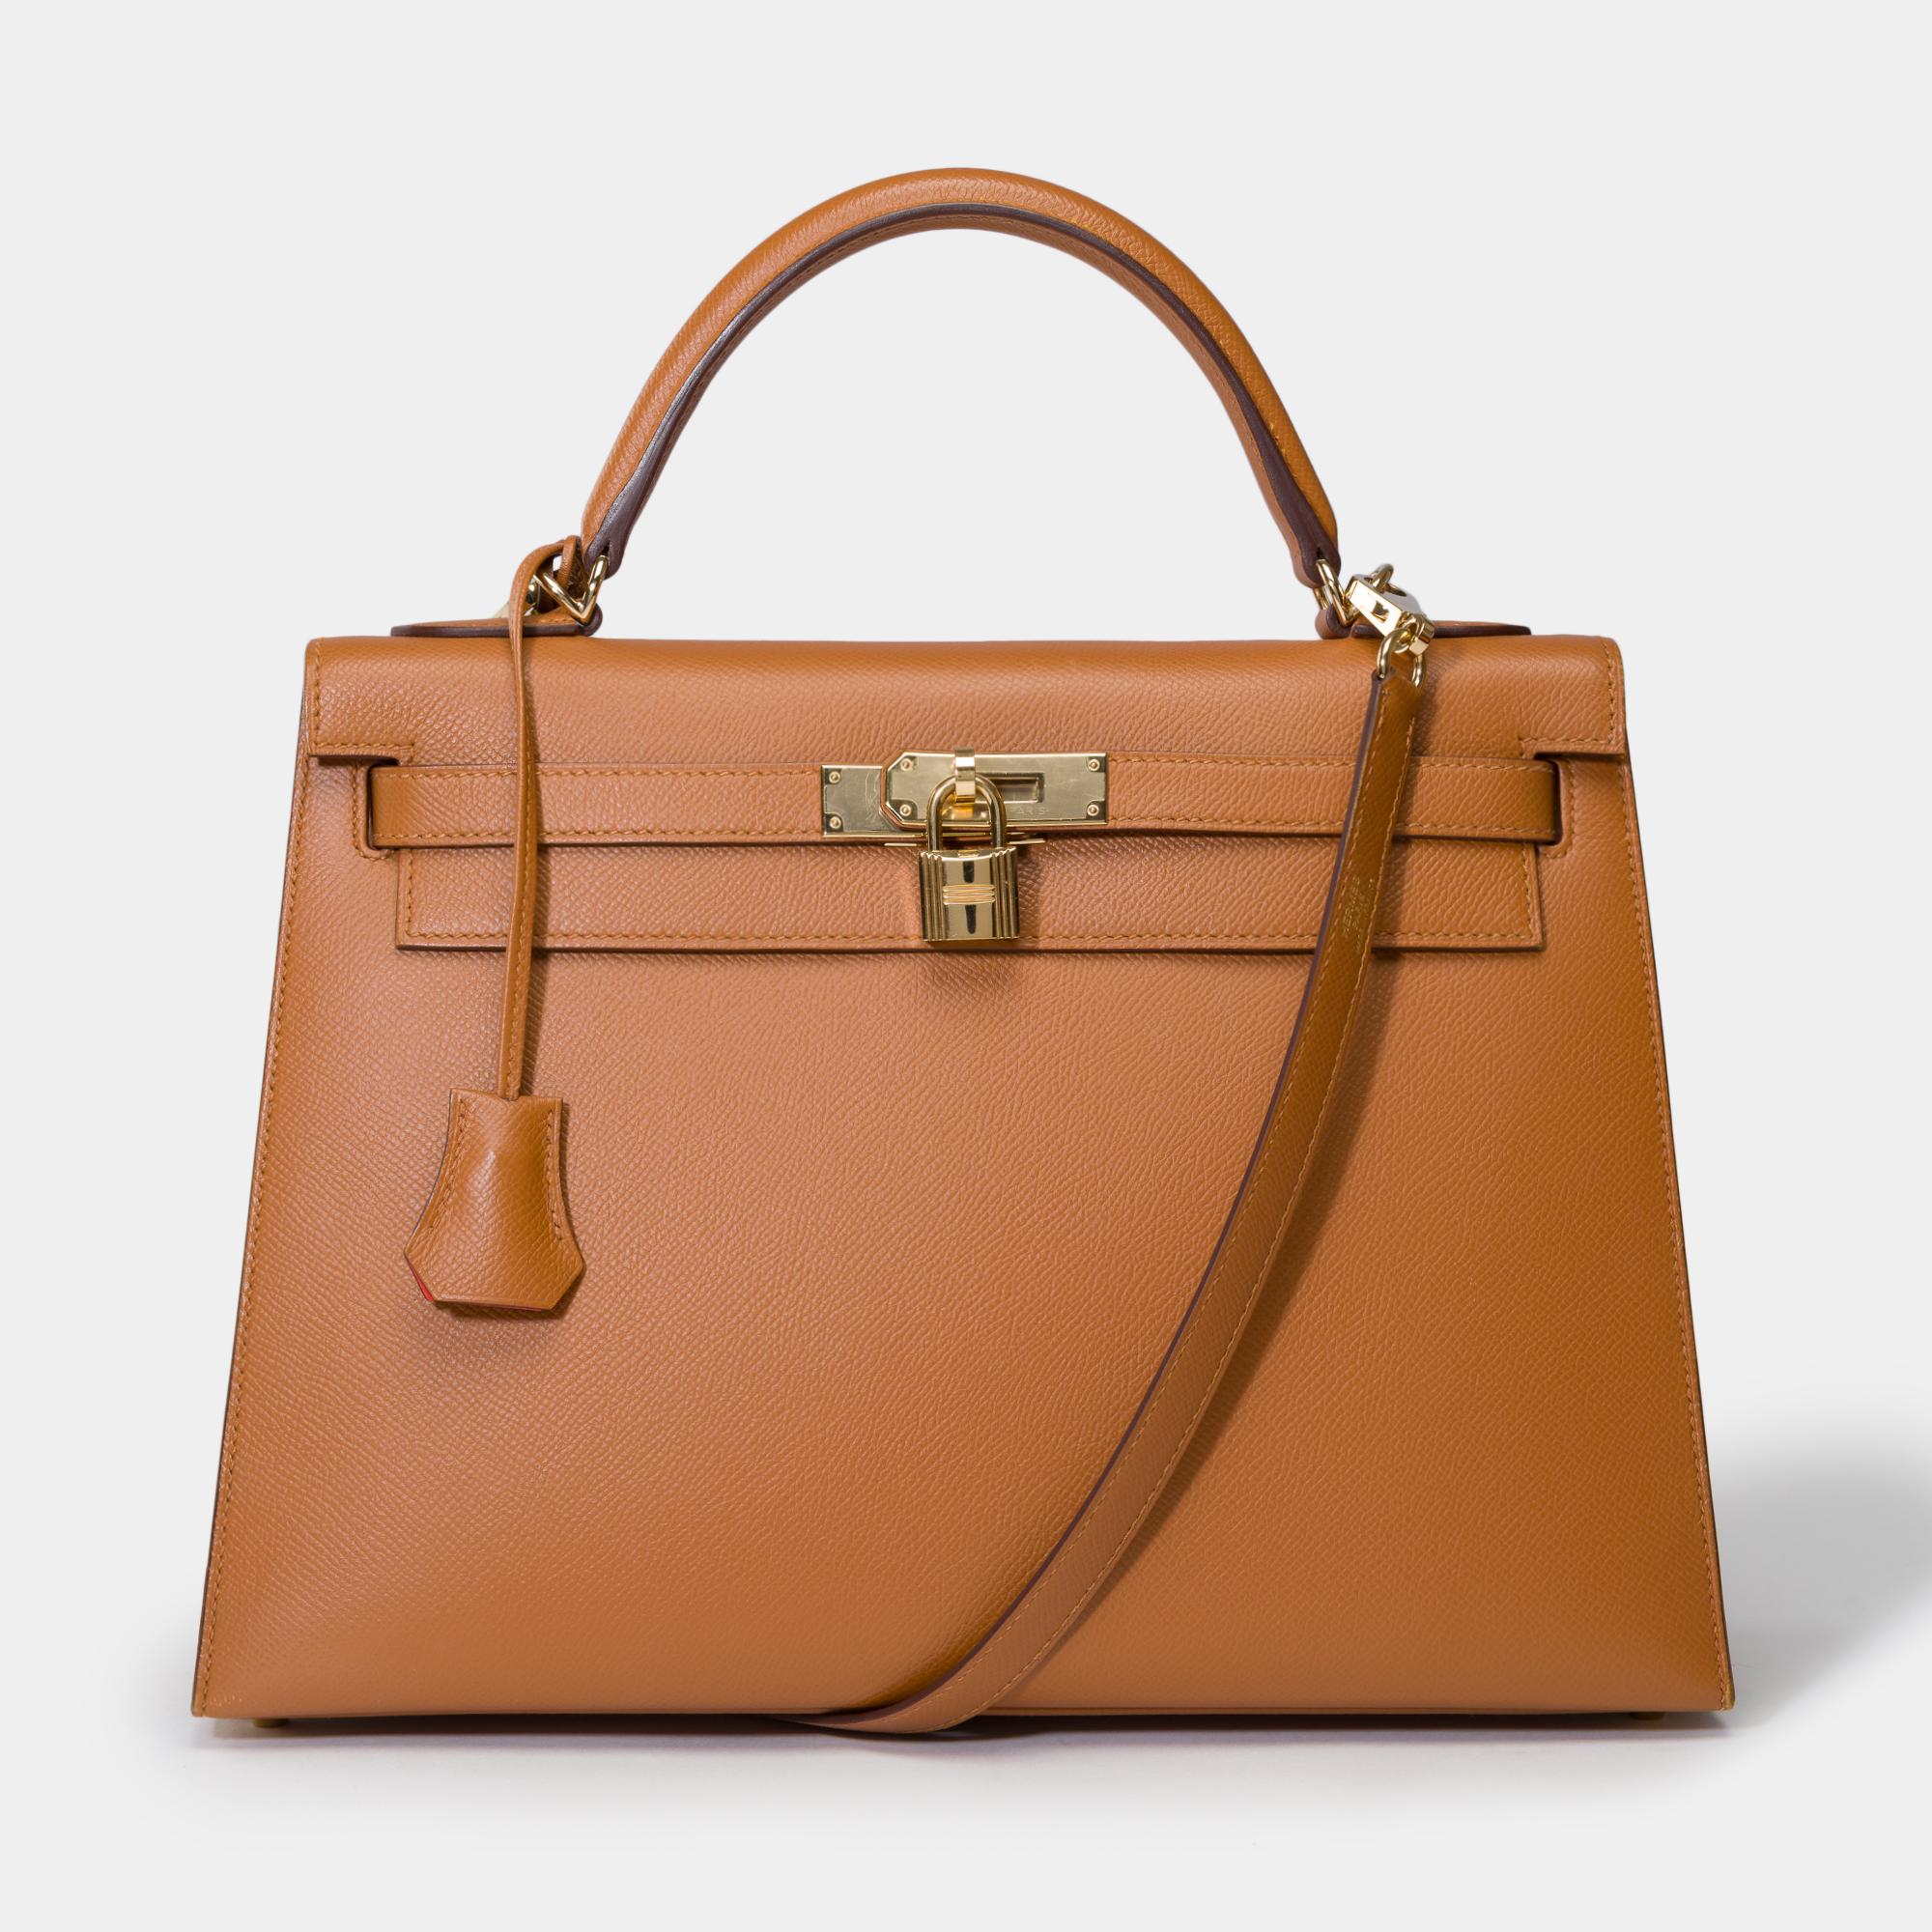 Exceptional​ ​&​ ​Rare​ ​Hermes​ ​Kelly​ ​32​ ​sellier​ ​strap​ ​handbag​ ​(Special​ ​Order​ ​-​ ​Horse​ ​Shoe​ ​HSO)​ ​in​ ​Camel​ ​(Gold)​ ​epsom​ ​leather​ ​&​ ​orange​ ​interior,​ ​gold​ ​plated​ ​metal​ ​trim,​ ​camel​ ​leather​ ​handle,​